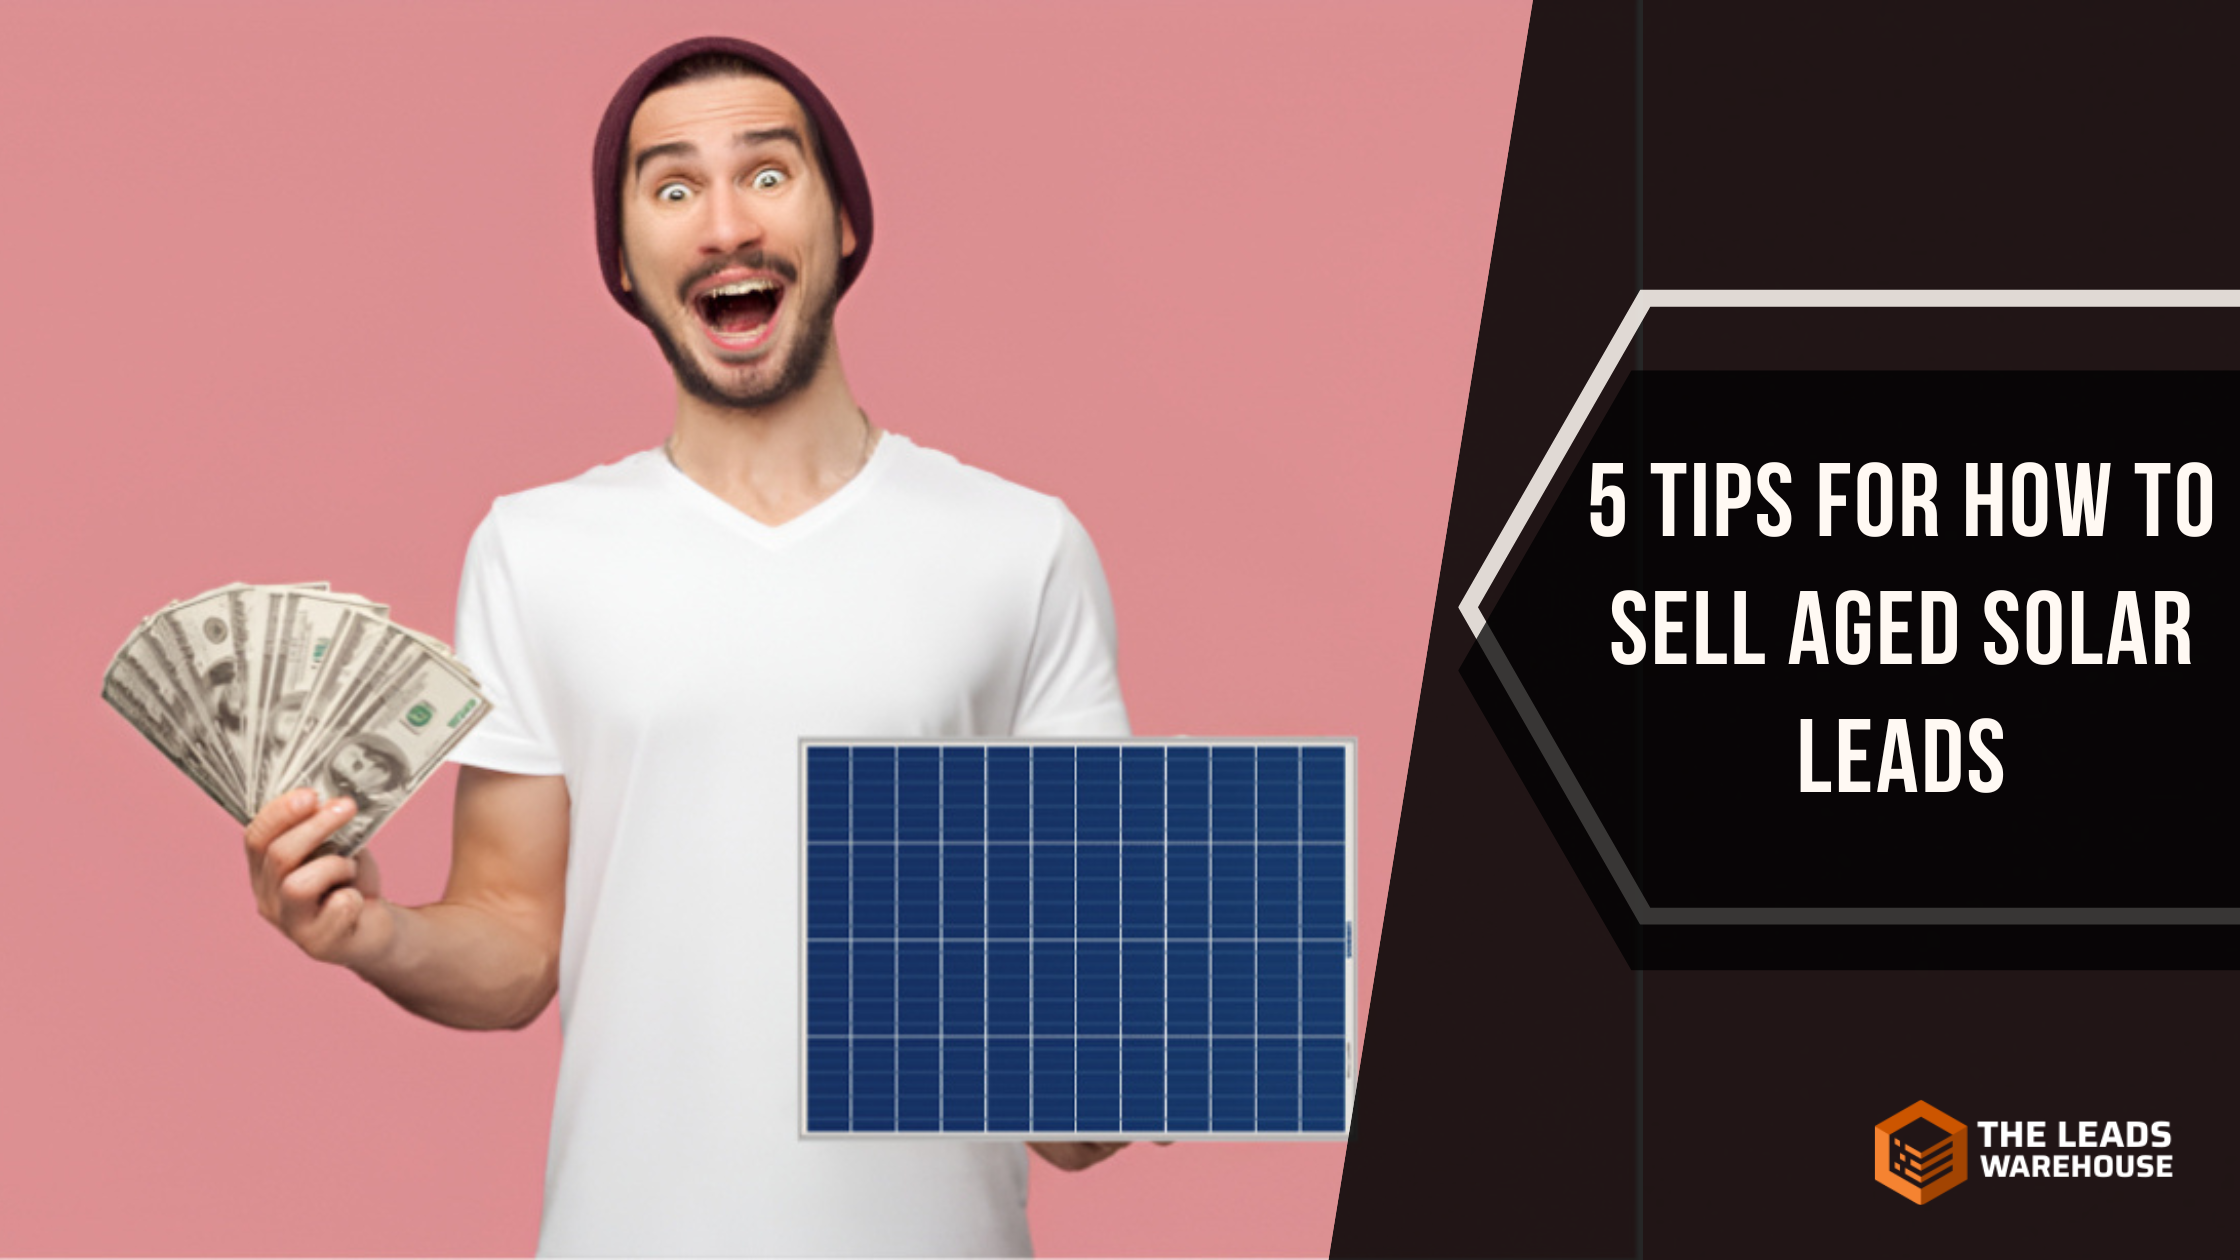 Sell Aged Solar Leads | 5 Tips